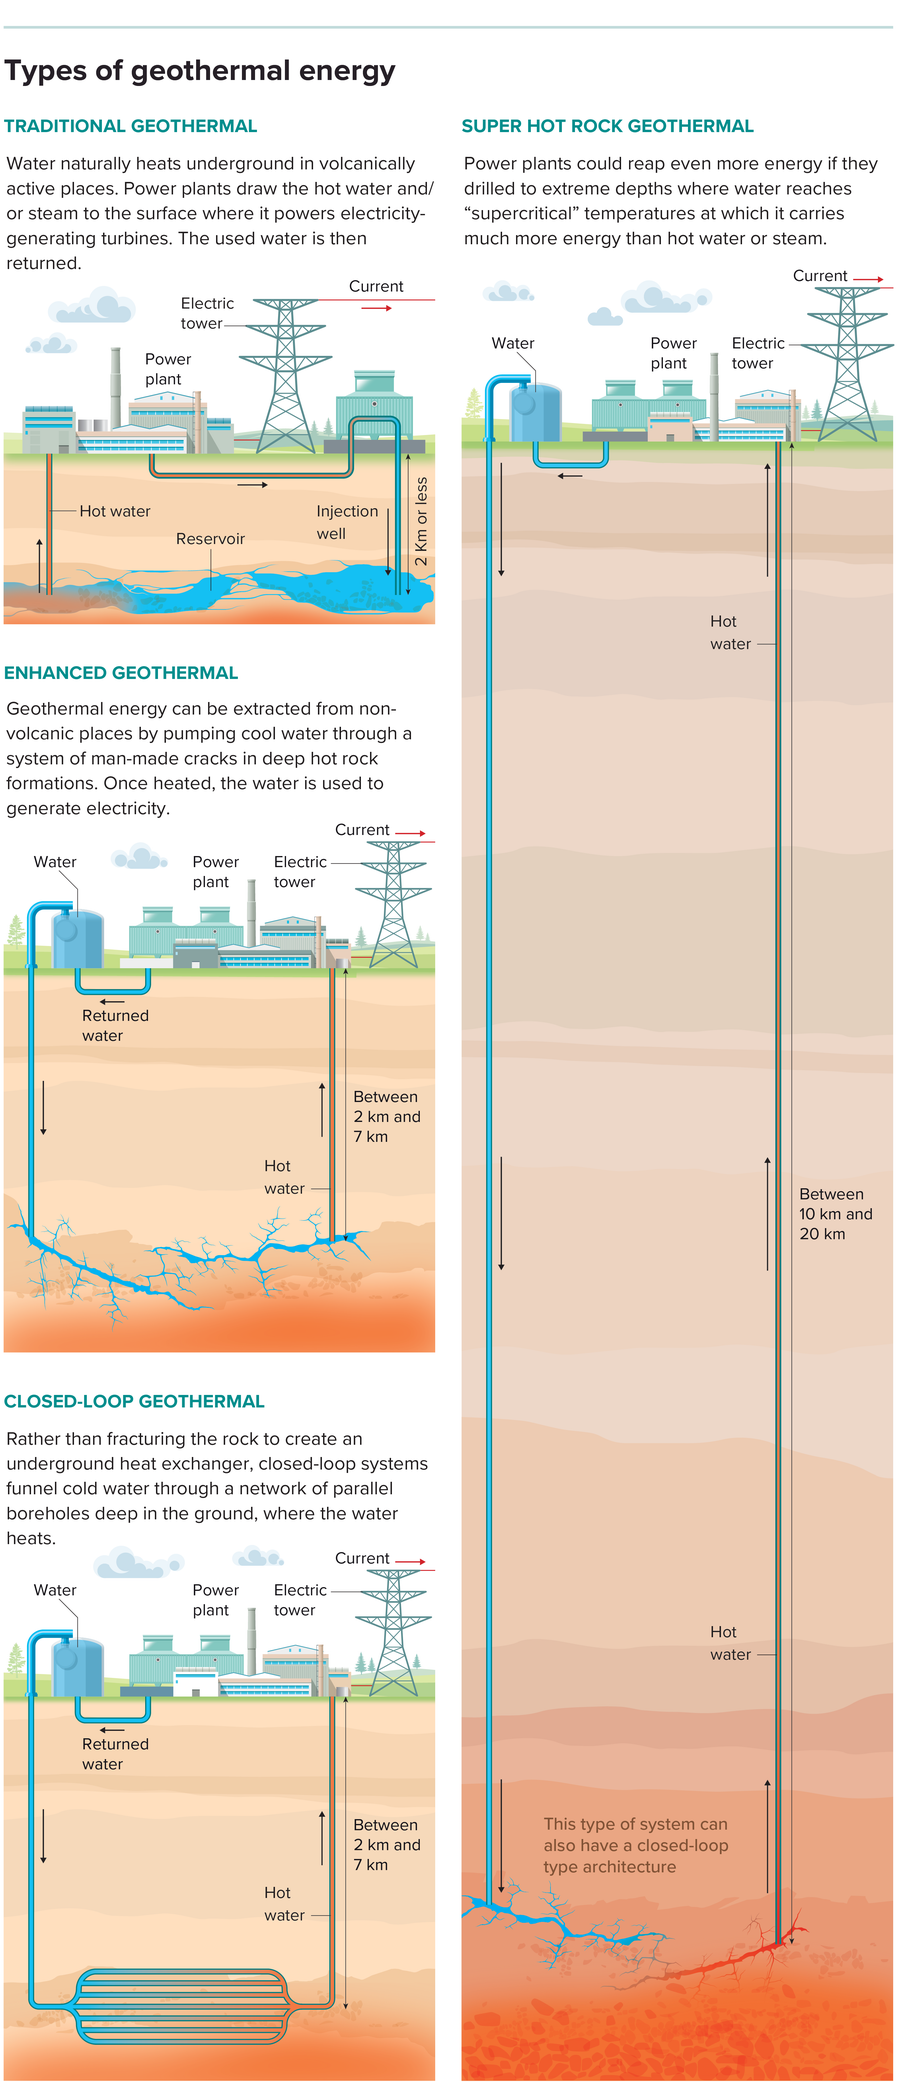 A graphic depicts traditional geothermal as well as new methods that could enable broader geothermal energy extraction: enhanced geothermal, closed-loop geothermal and super hot rock geothermal.